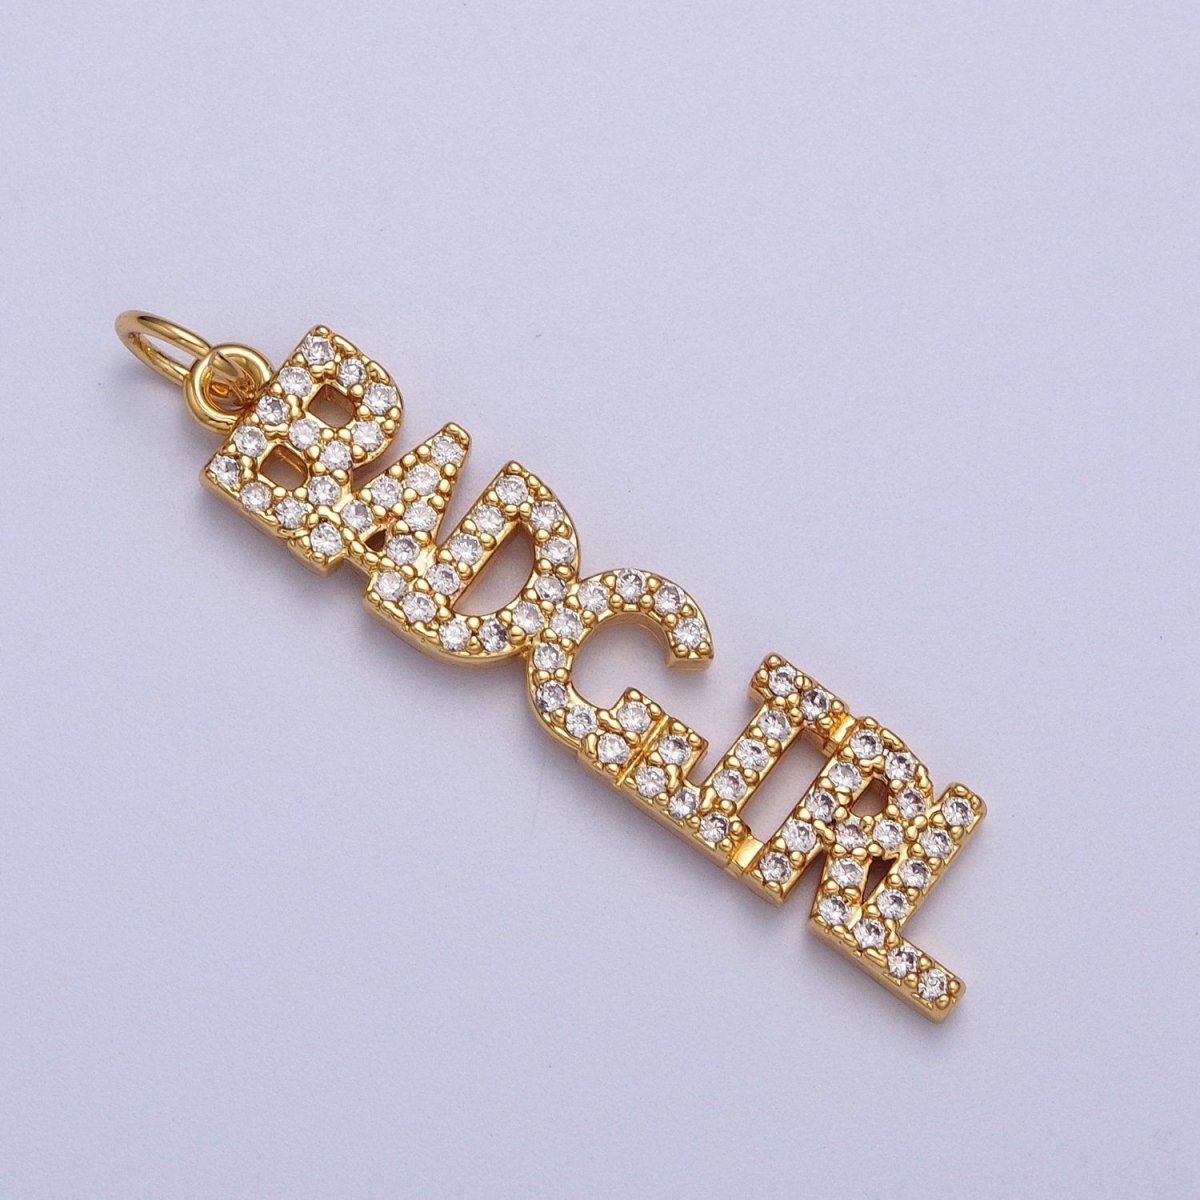 24K Gold Filled Word Necklace, Micro Pave Bad Girl Pendant Add on Charm for Bracelet Necklace Earring Components AC551 AC552 - DLUXCA